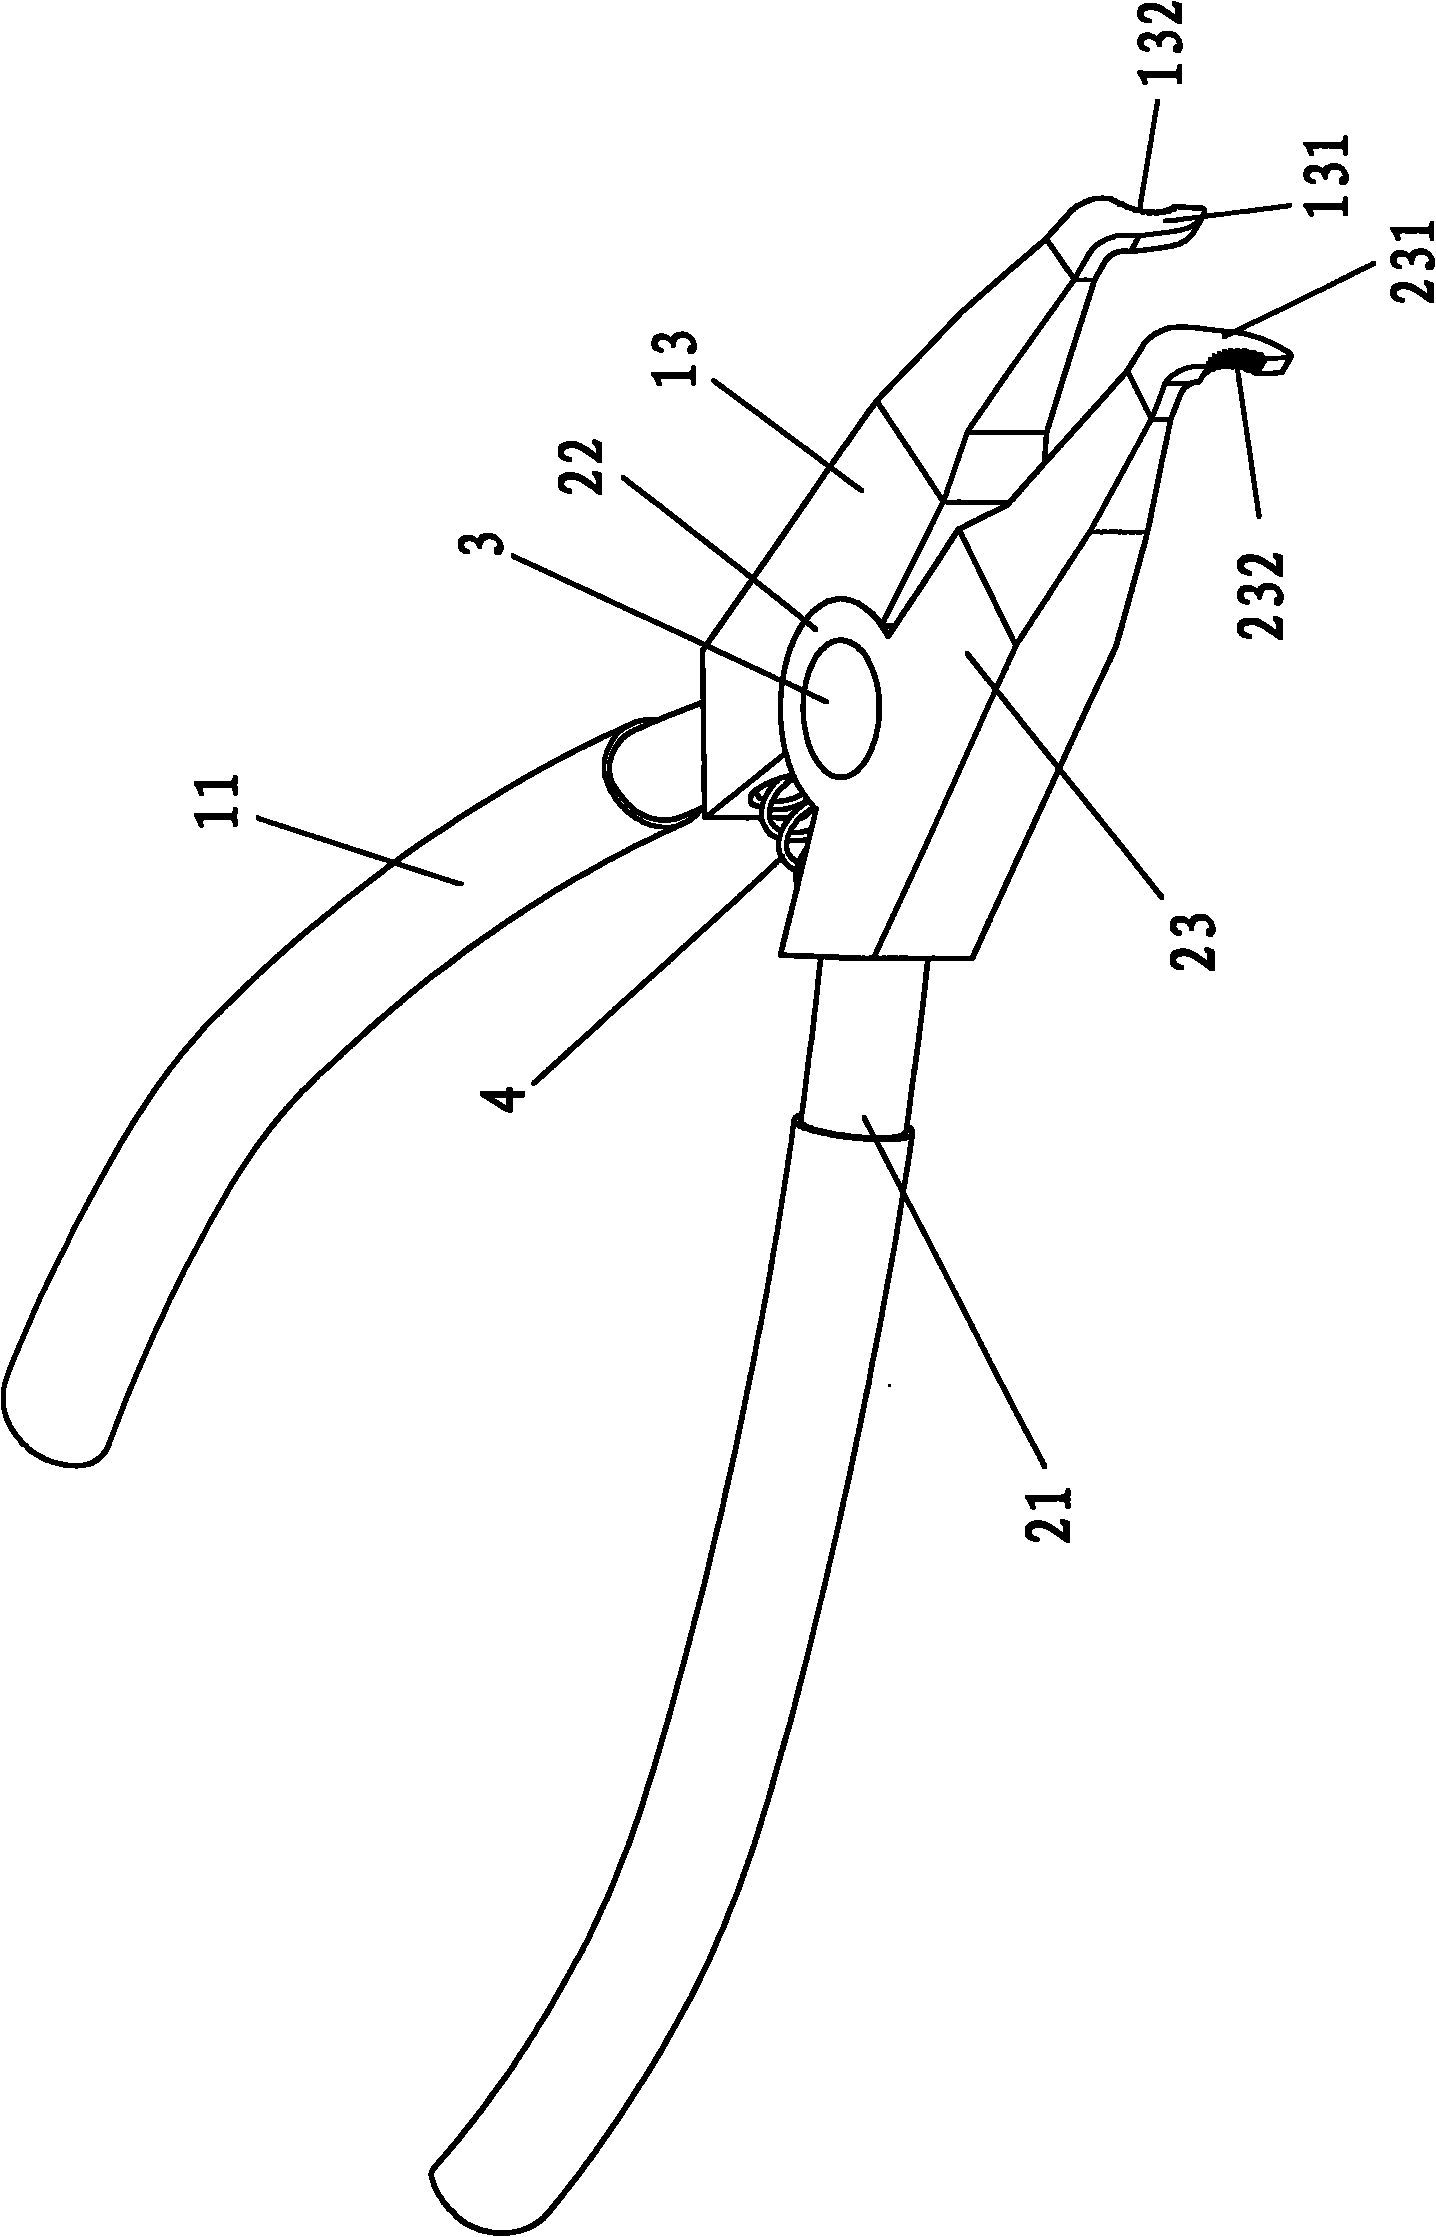 Pliers for chain joint